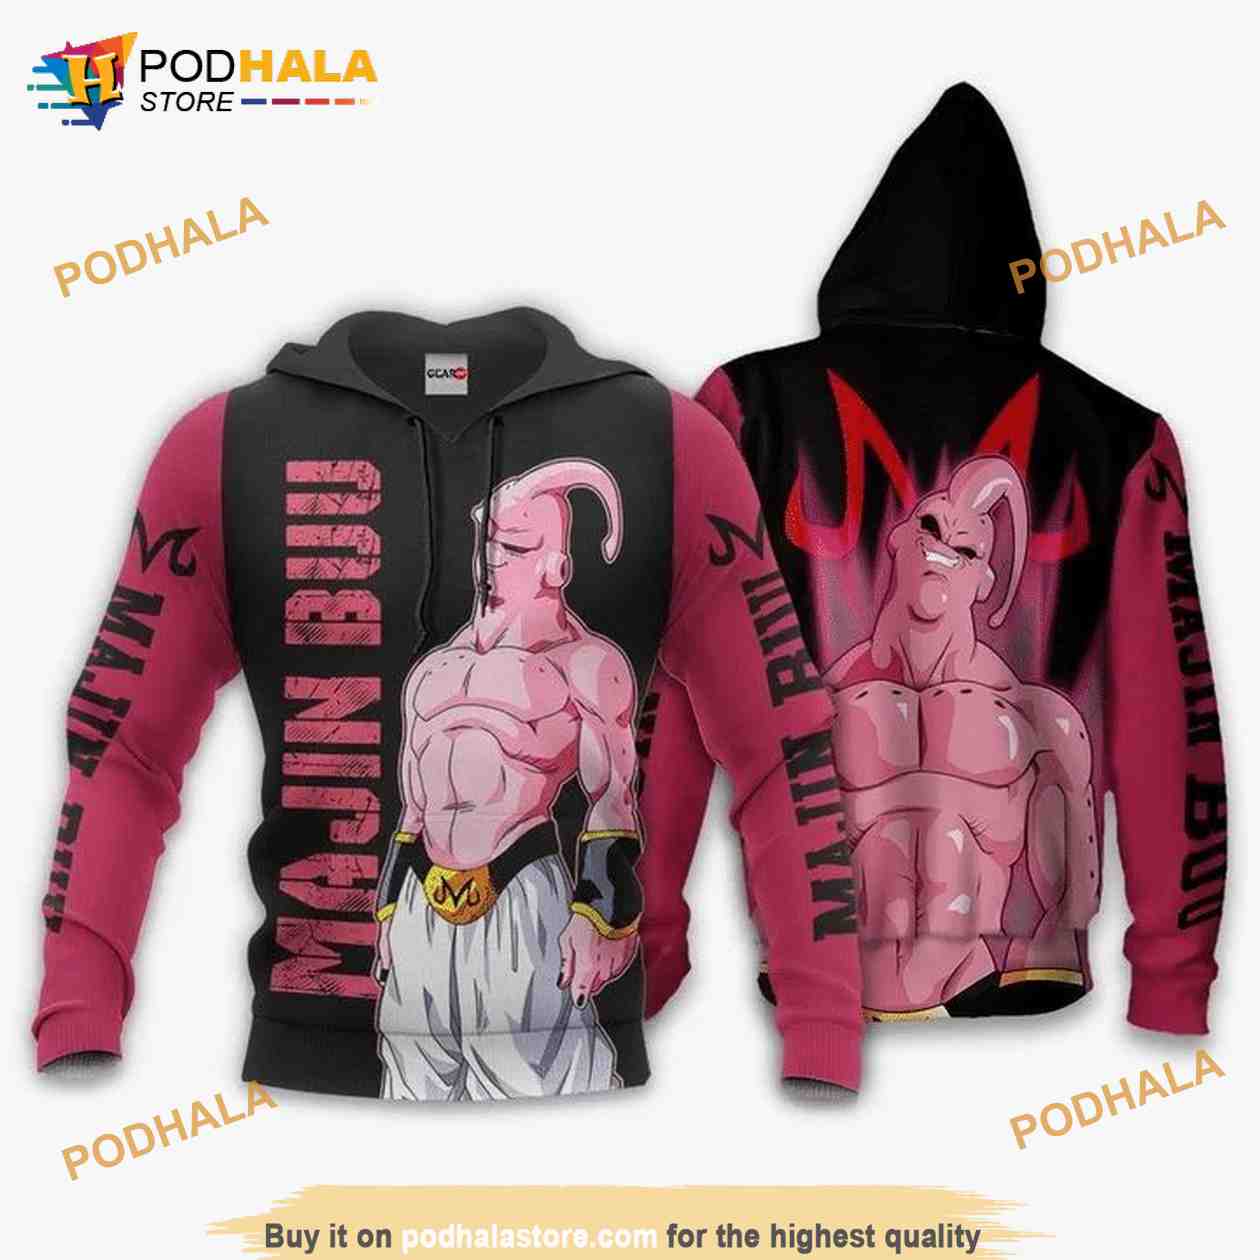 Majin Buu - Visit now for 3D Dragon Ball Z shirts now on sale